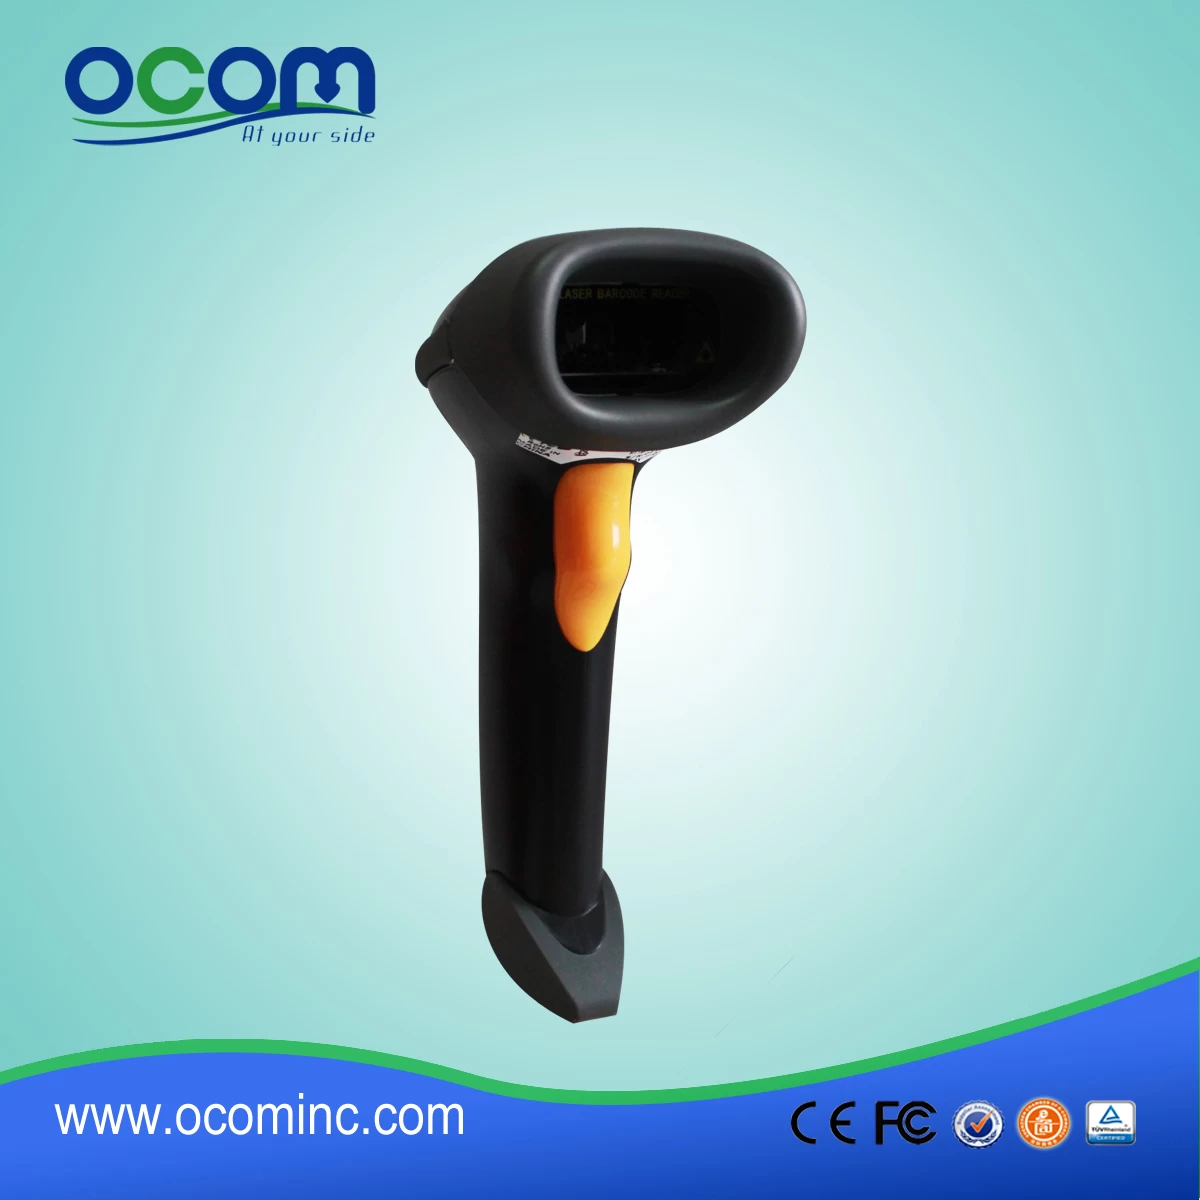 China Android USB Handheld Barcode Scanner Supplier